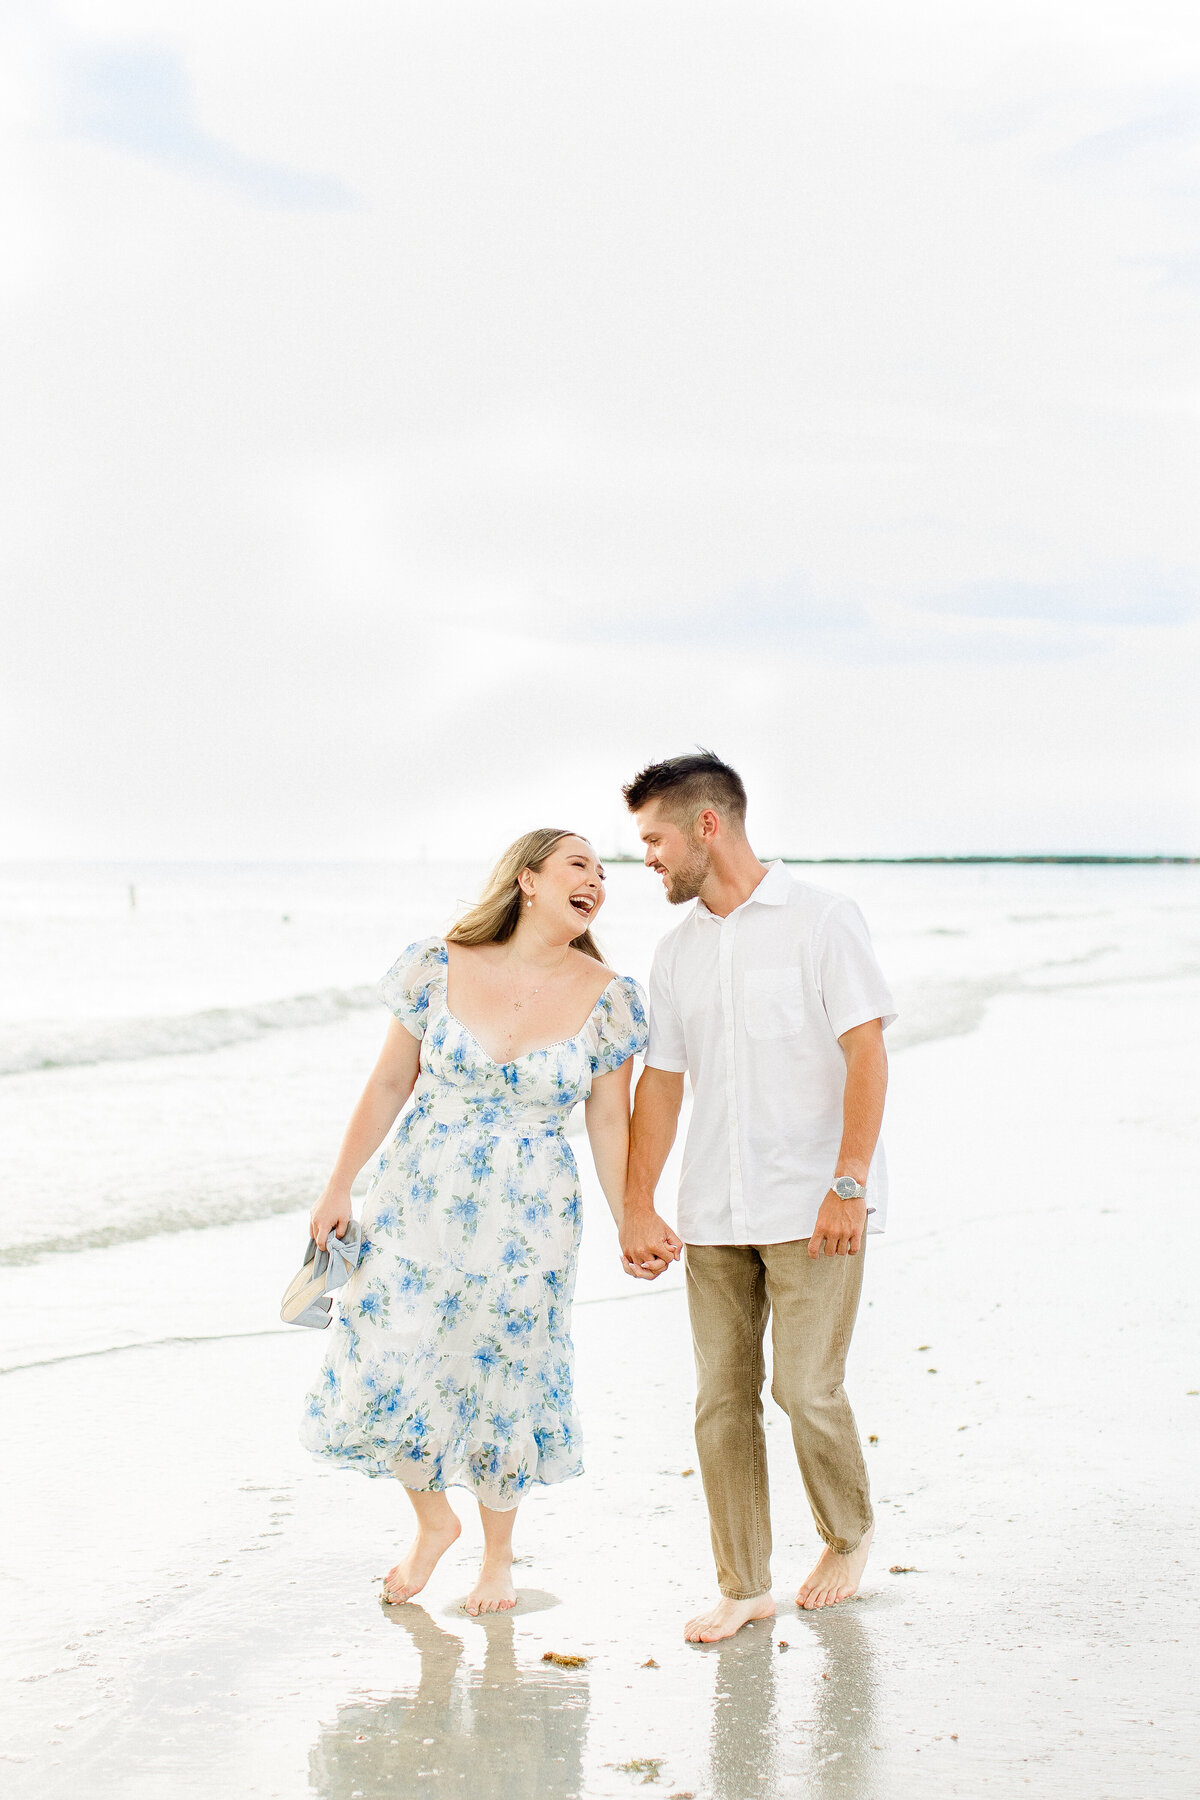 Tampa Engagement Session © Ailyn La Torre Photography  20221-8707